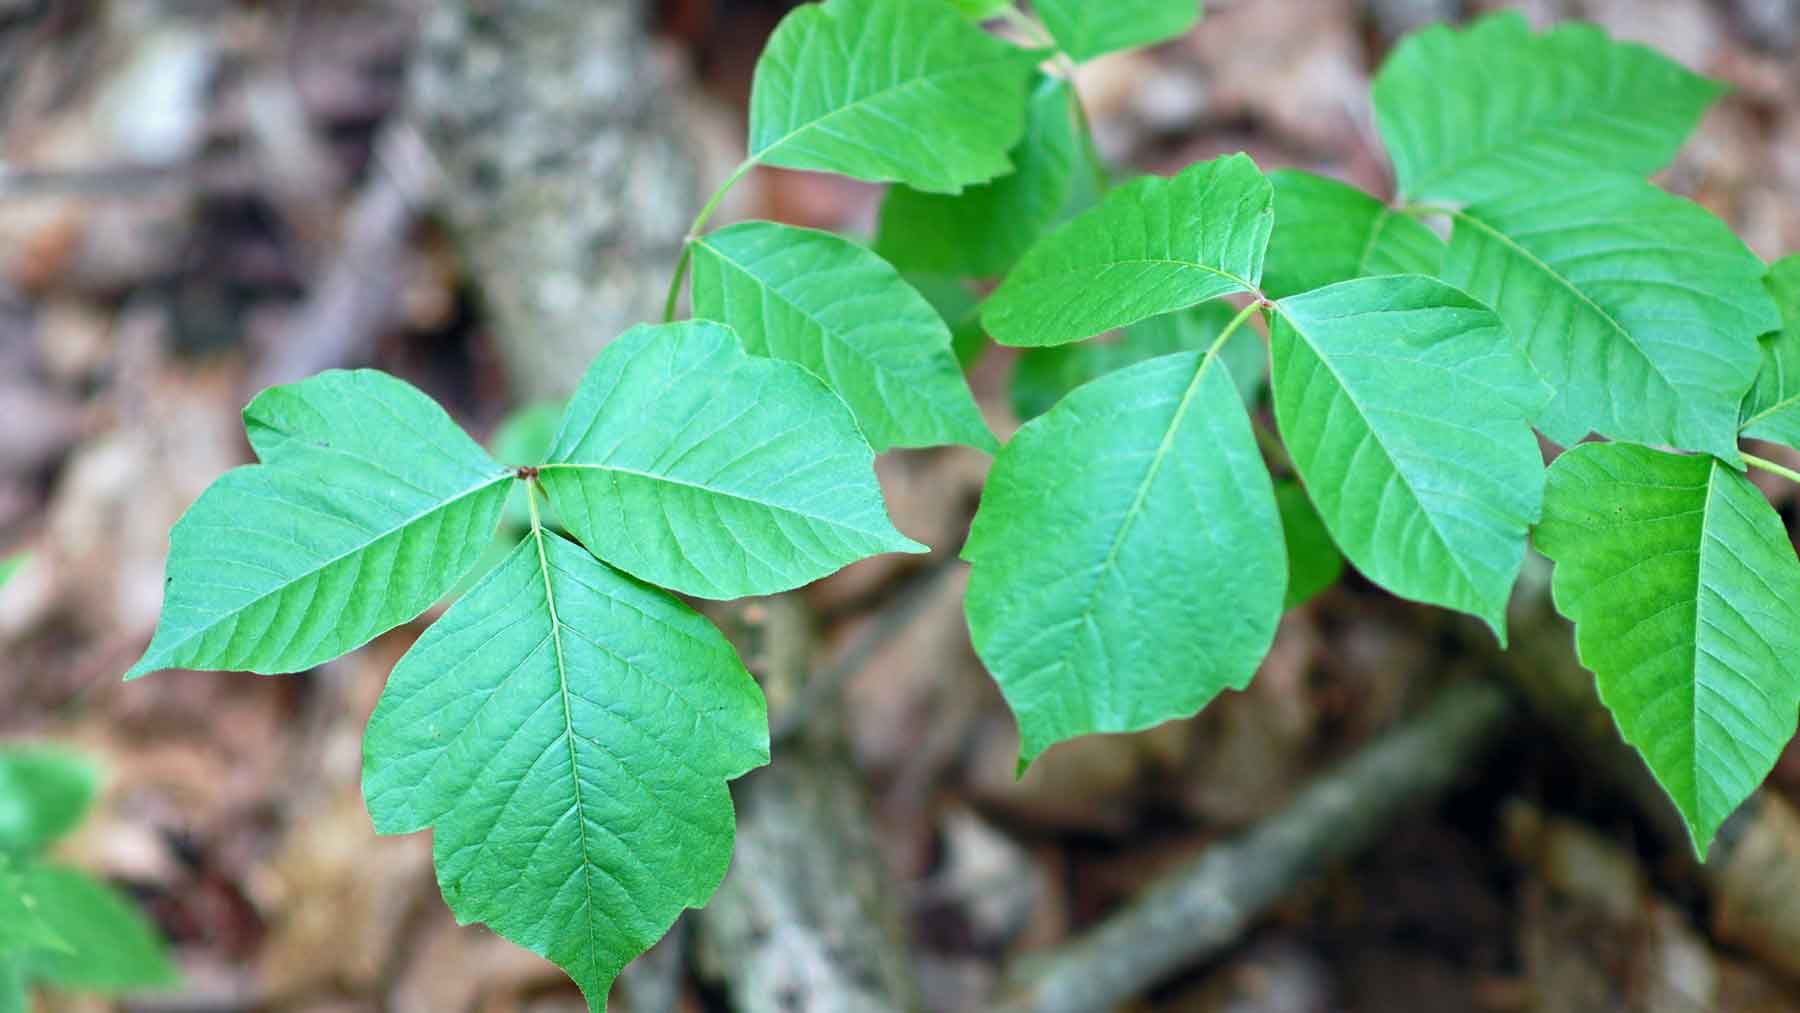 What to do if you encounter poison ivy